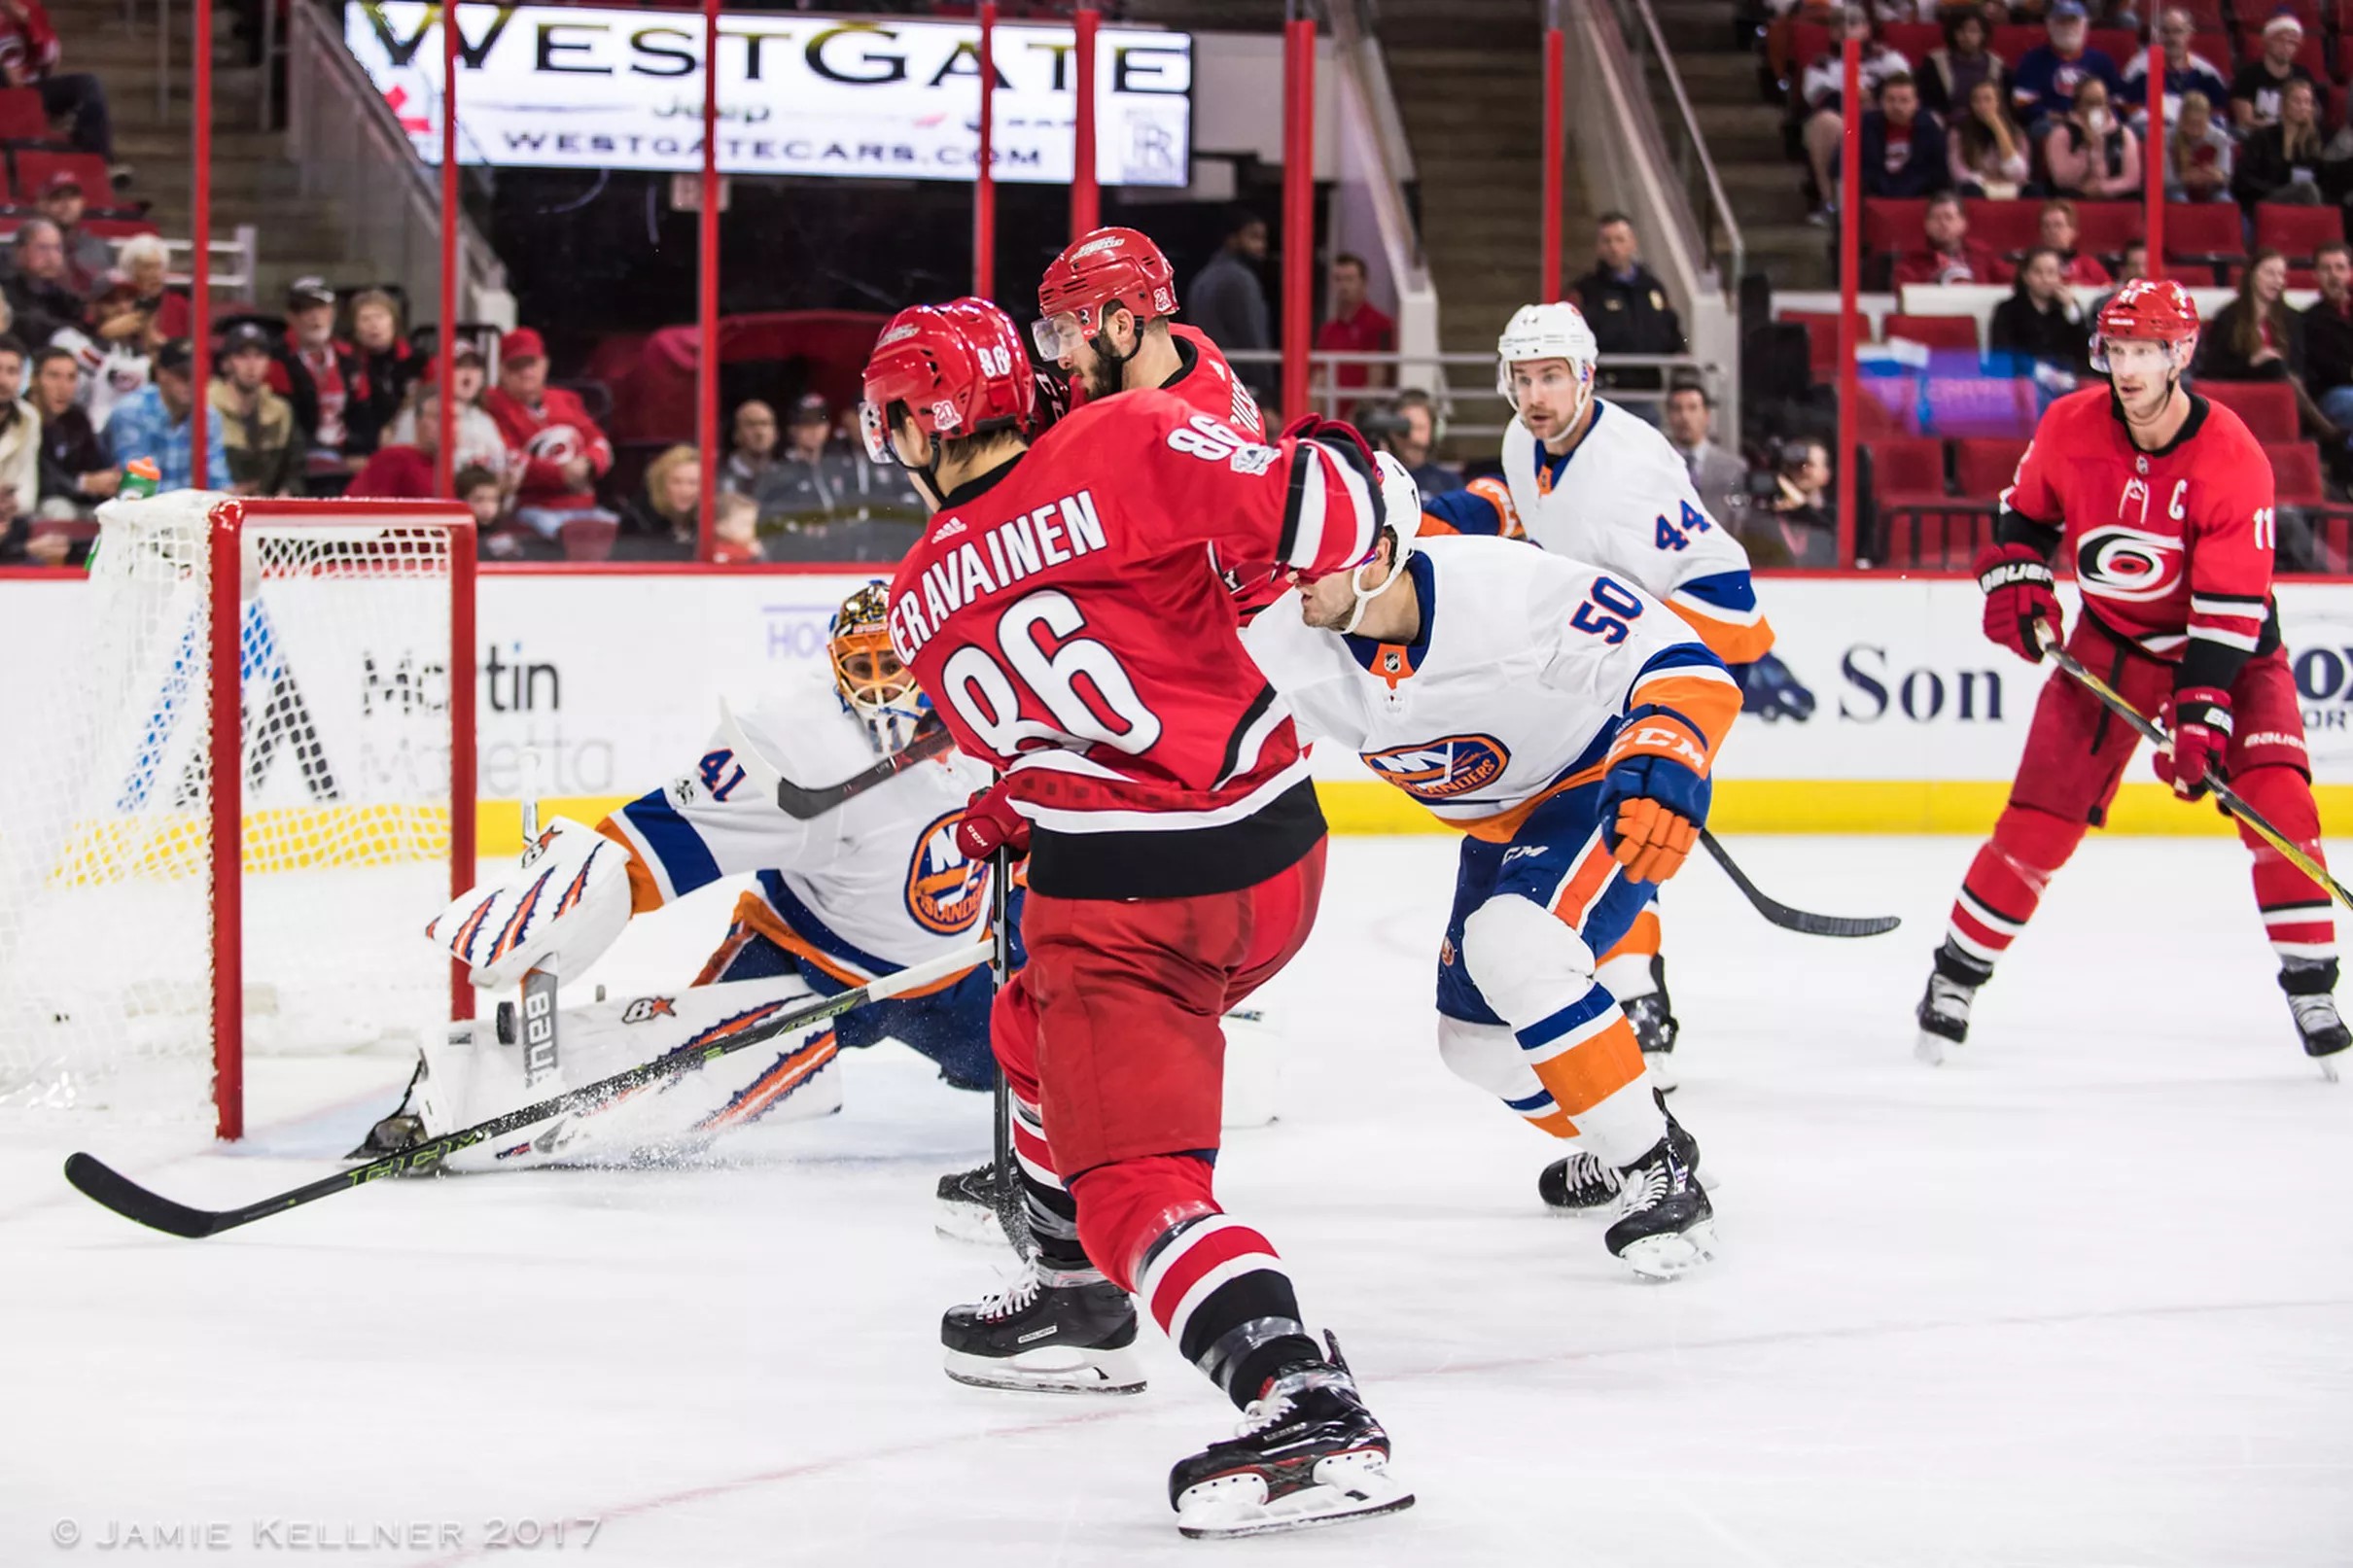 Carolina Hurricanes vs. New York Islanders: Game Preview and Discussion